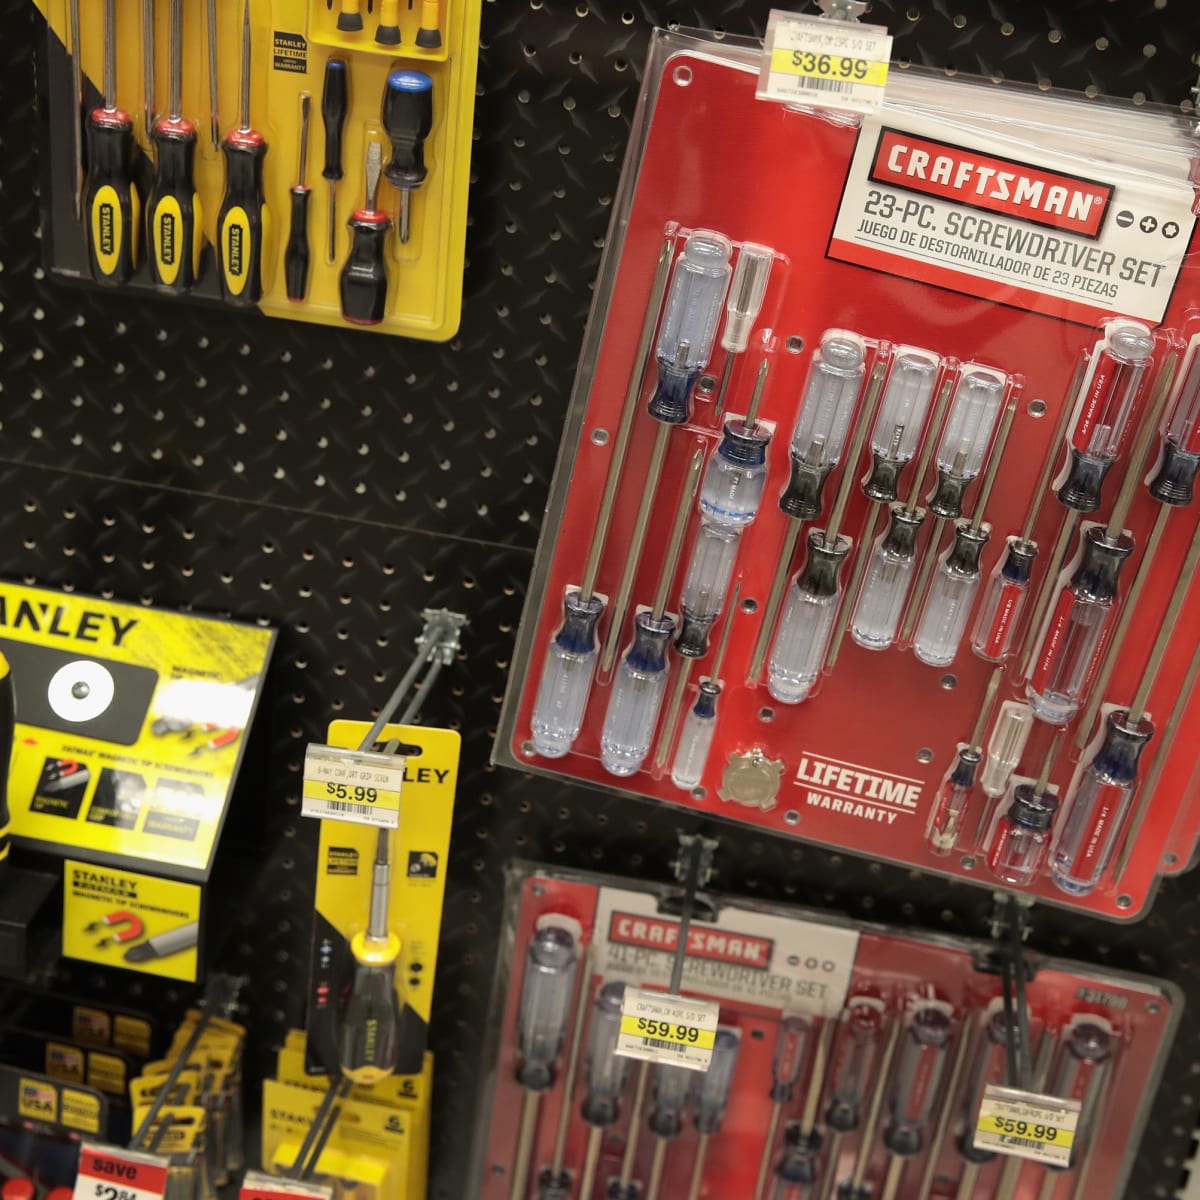 Sears sells Craftsman to Stanley Black and Decker - ABC7 Chicago